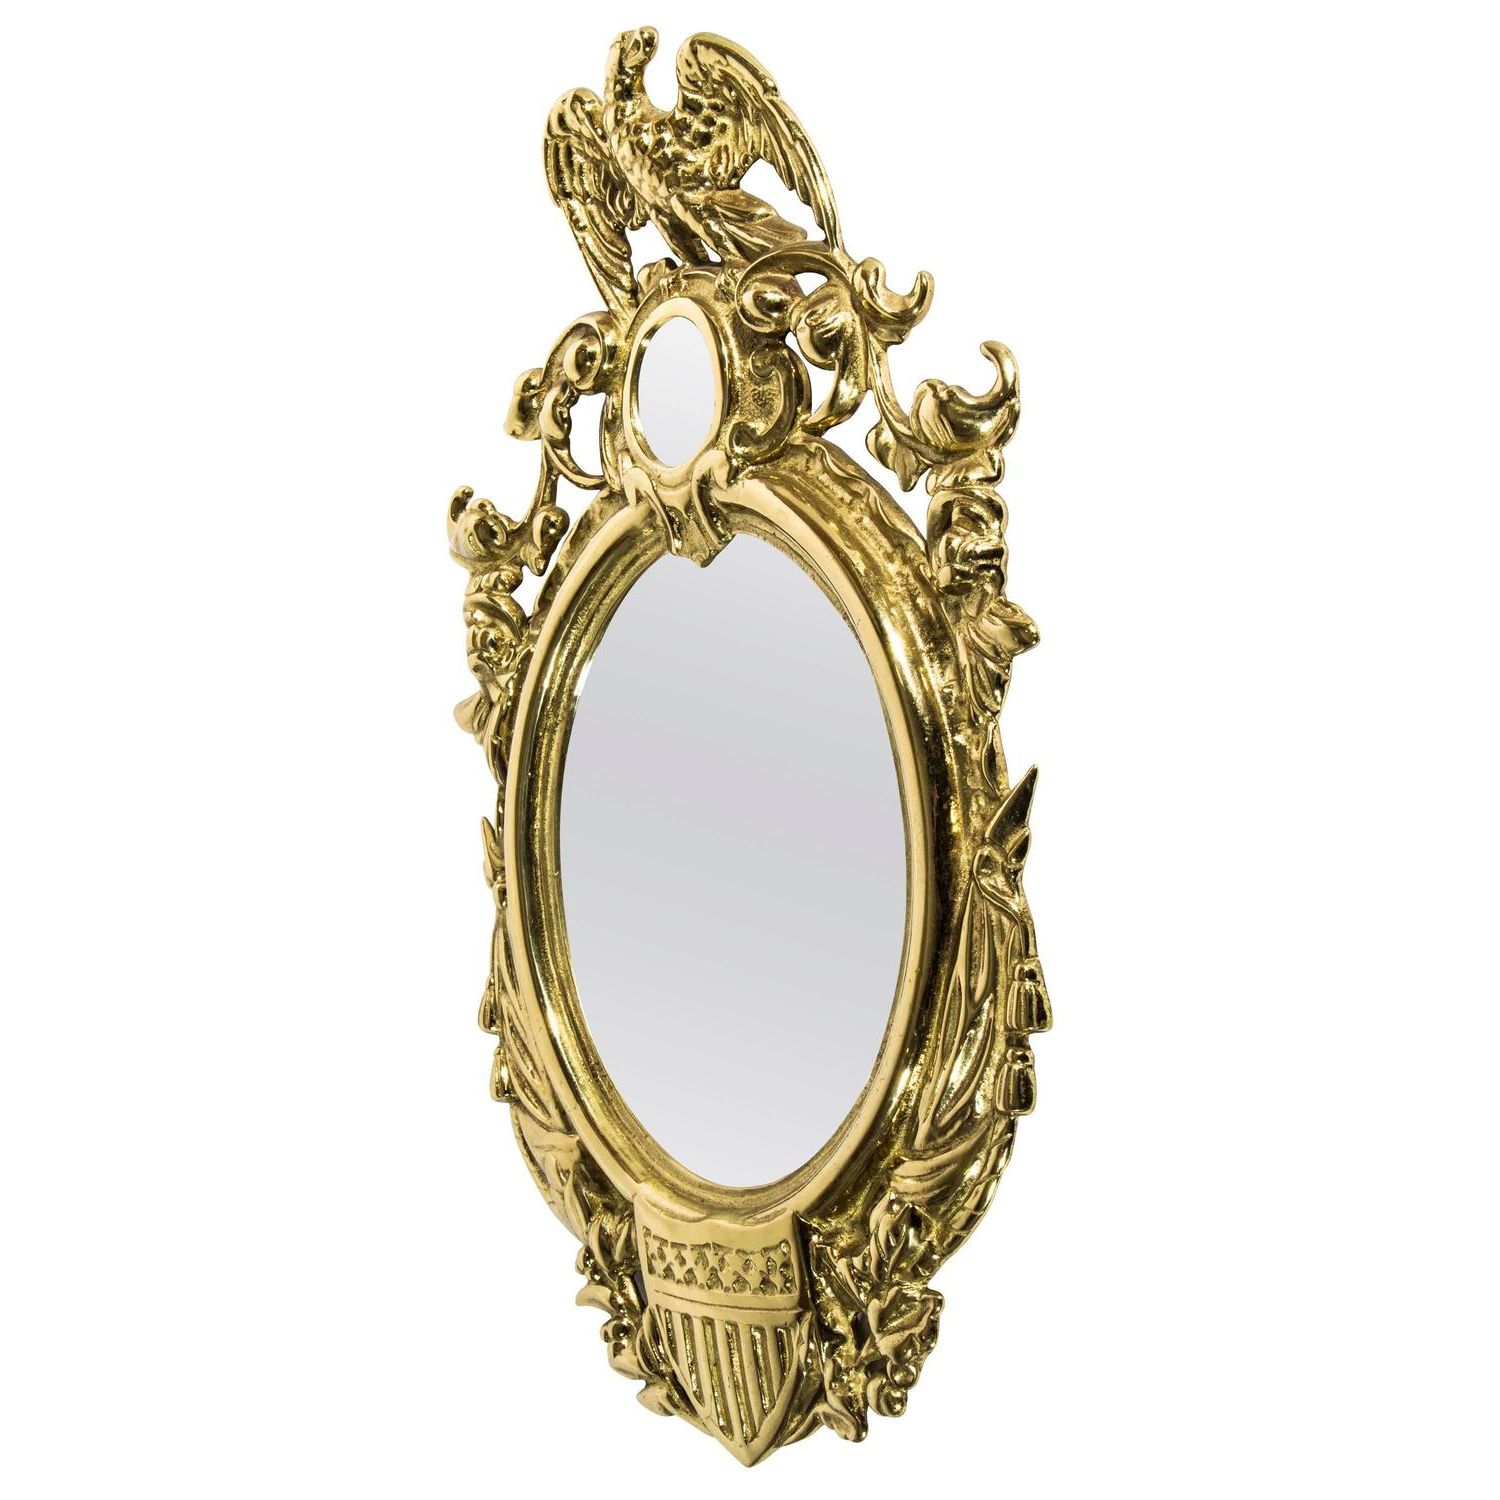 Well Known Antique Brass Standing Mirrors Regarding Antique Brass Wall Mirror At 1stdibs (View 11 of 15)